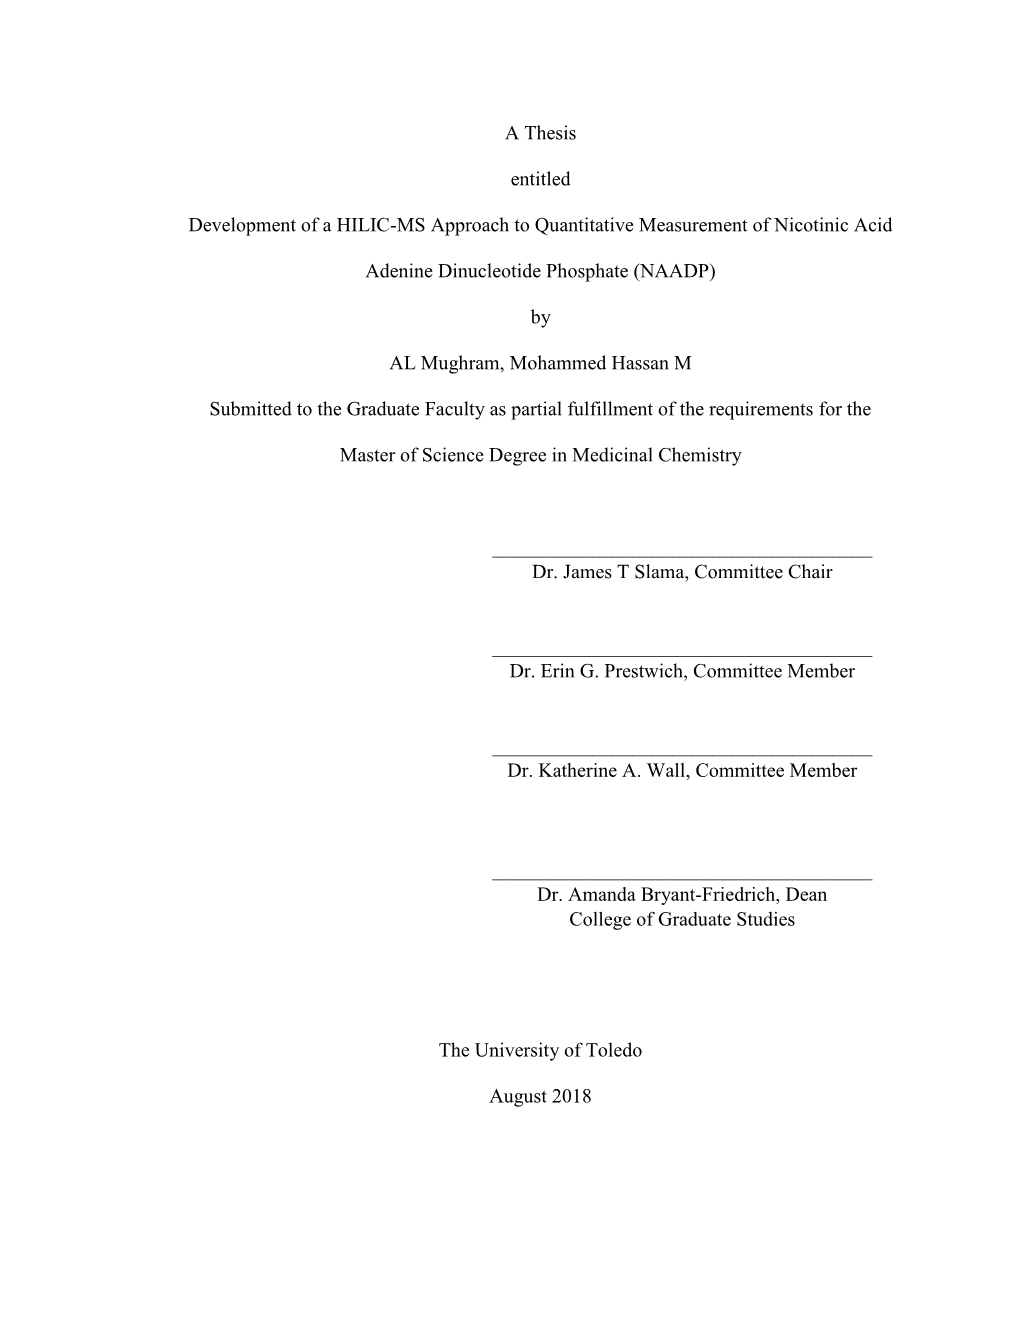 A Thesis Entitled Development of a HILIC-MS Approach to Quantitative